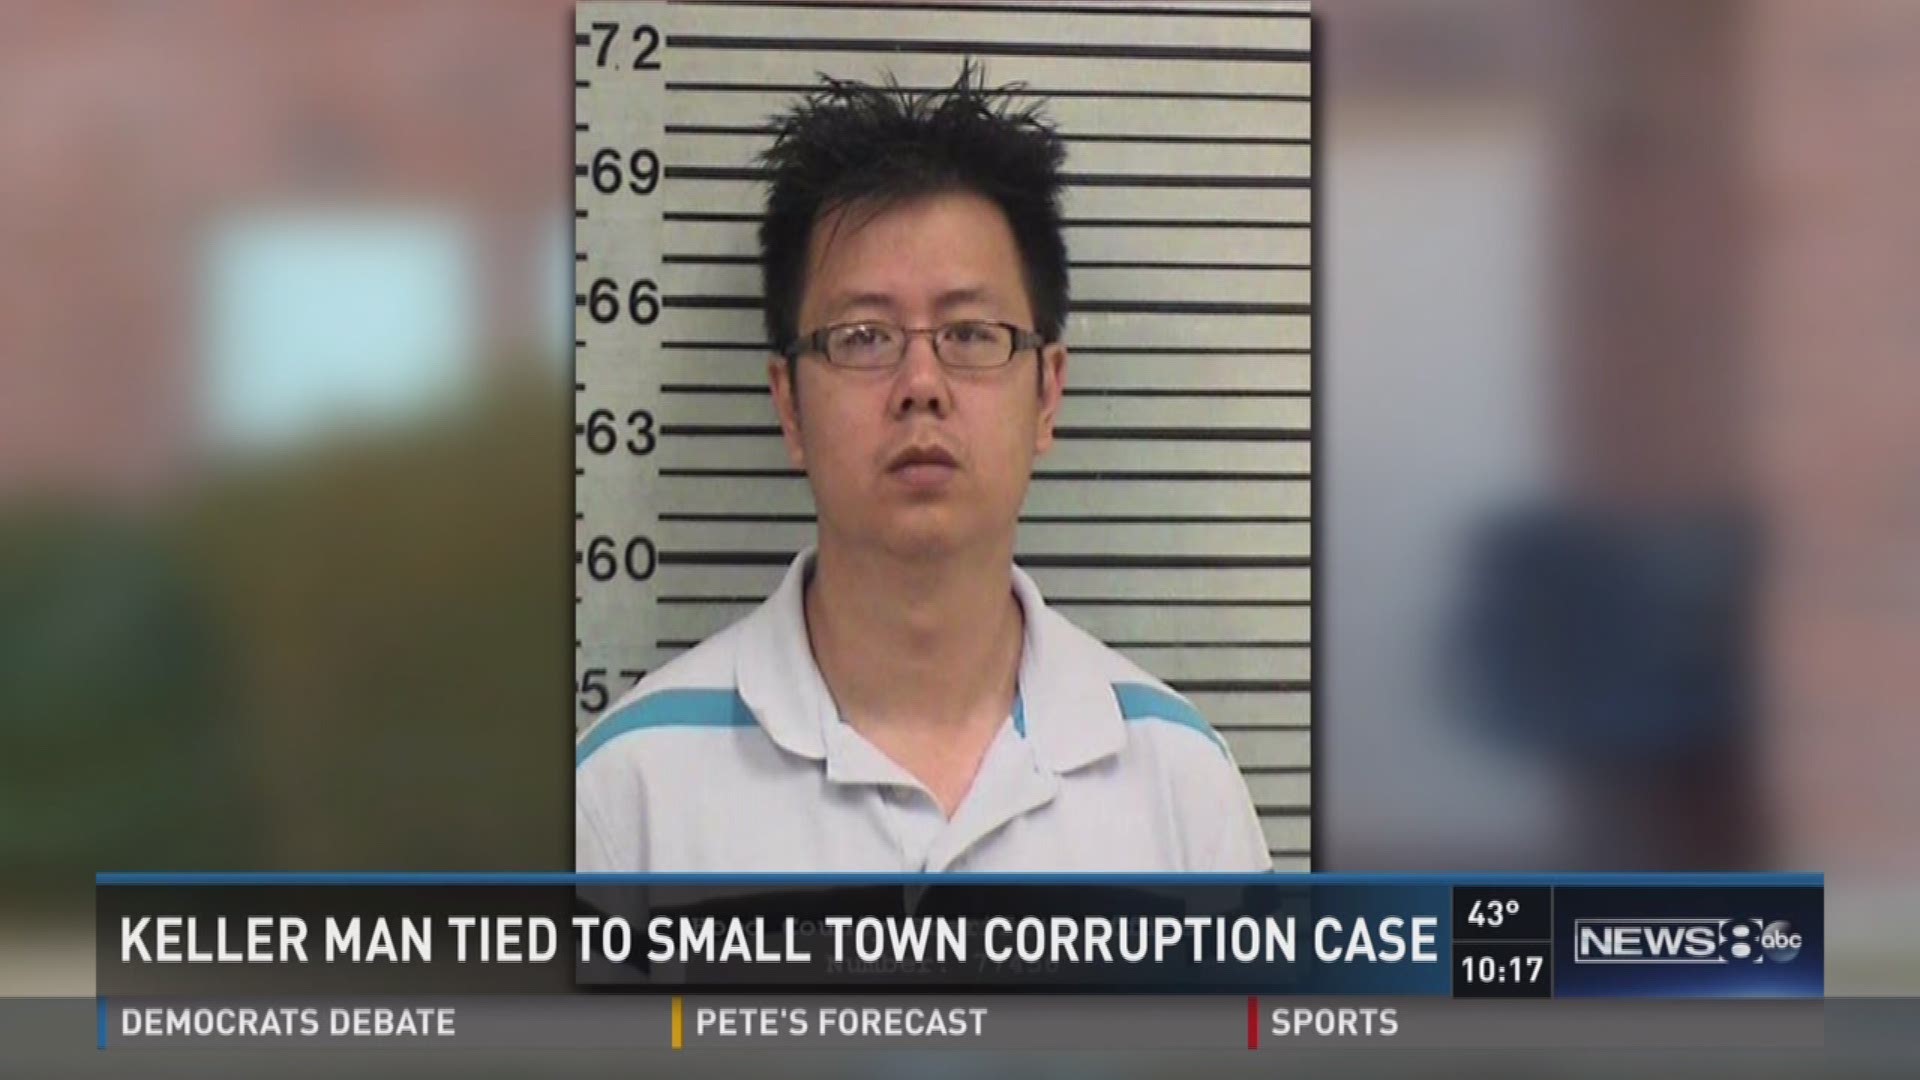 Ngoc Tri Nguyen, 38, who has past ties to illegal gaming operations in Texas, has now been arrested as part of what the FBI has called a "startling" bribery and corruption scheme. Todd Unger reports.